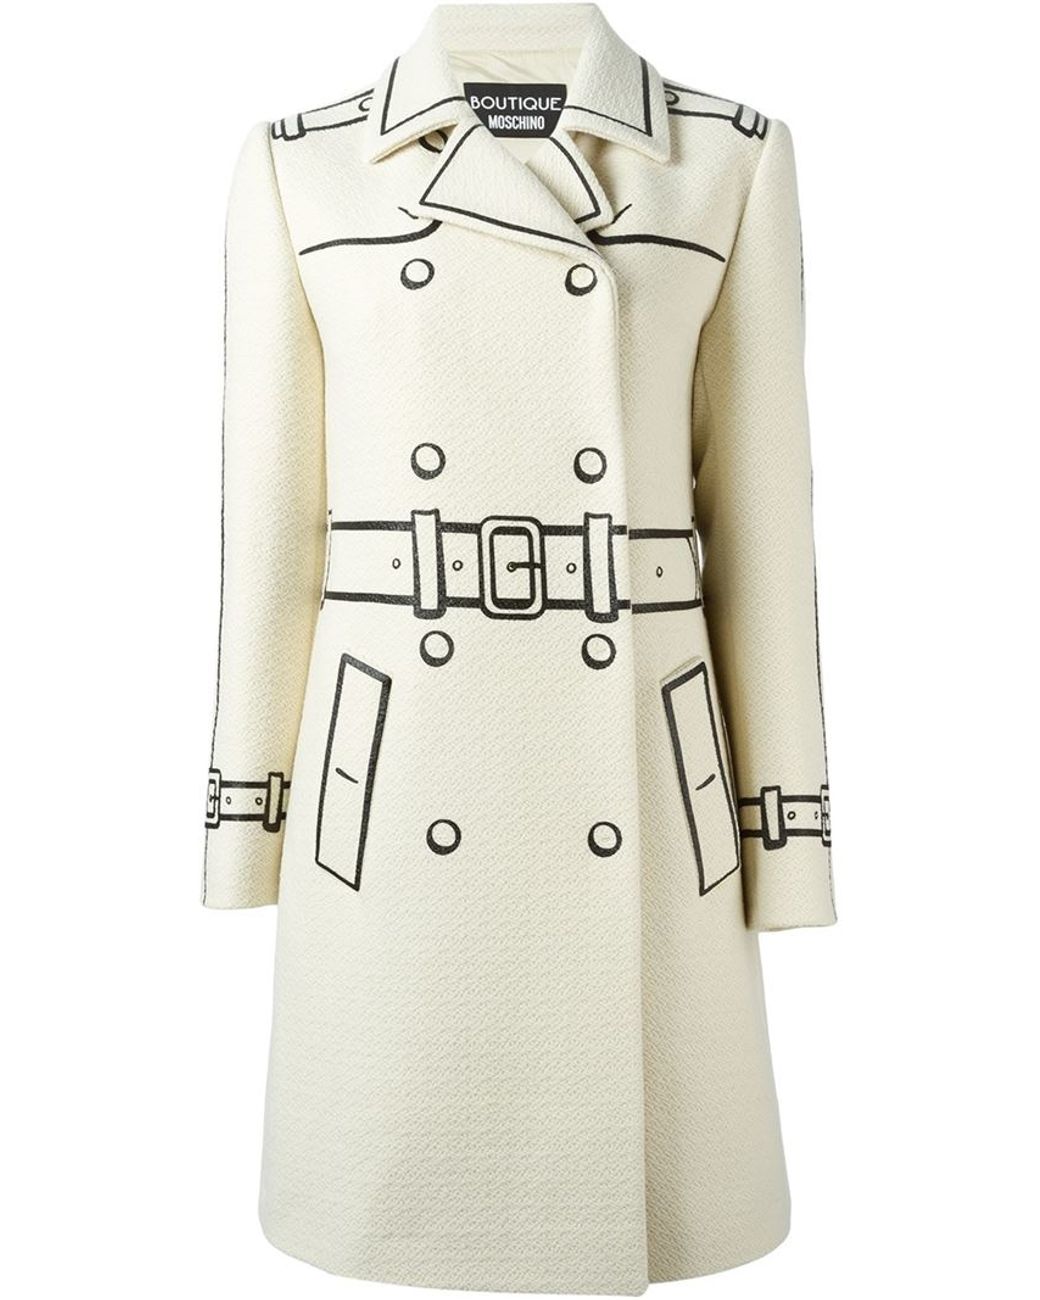 Boutique Moschino Trompe L'oeil Double Breasted Coat in White | Lyst